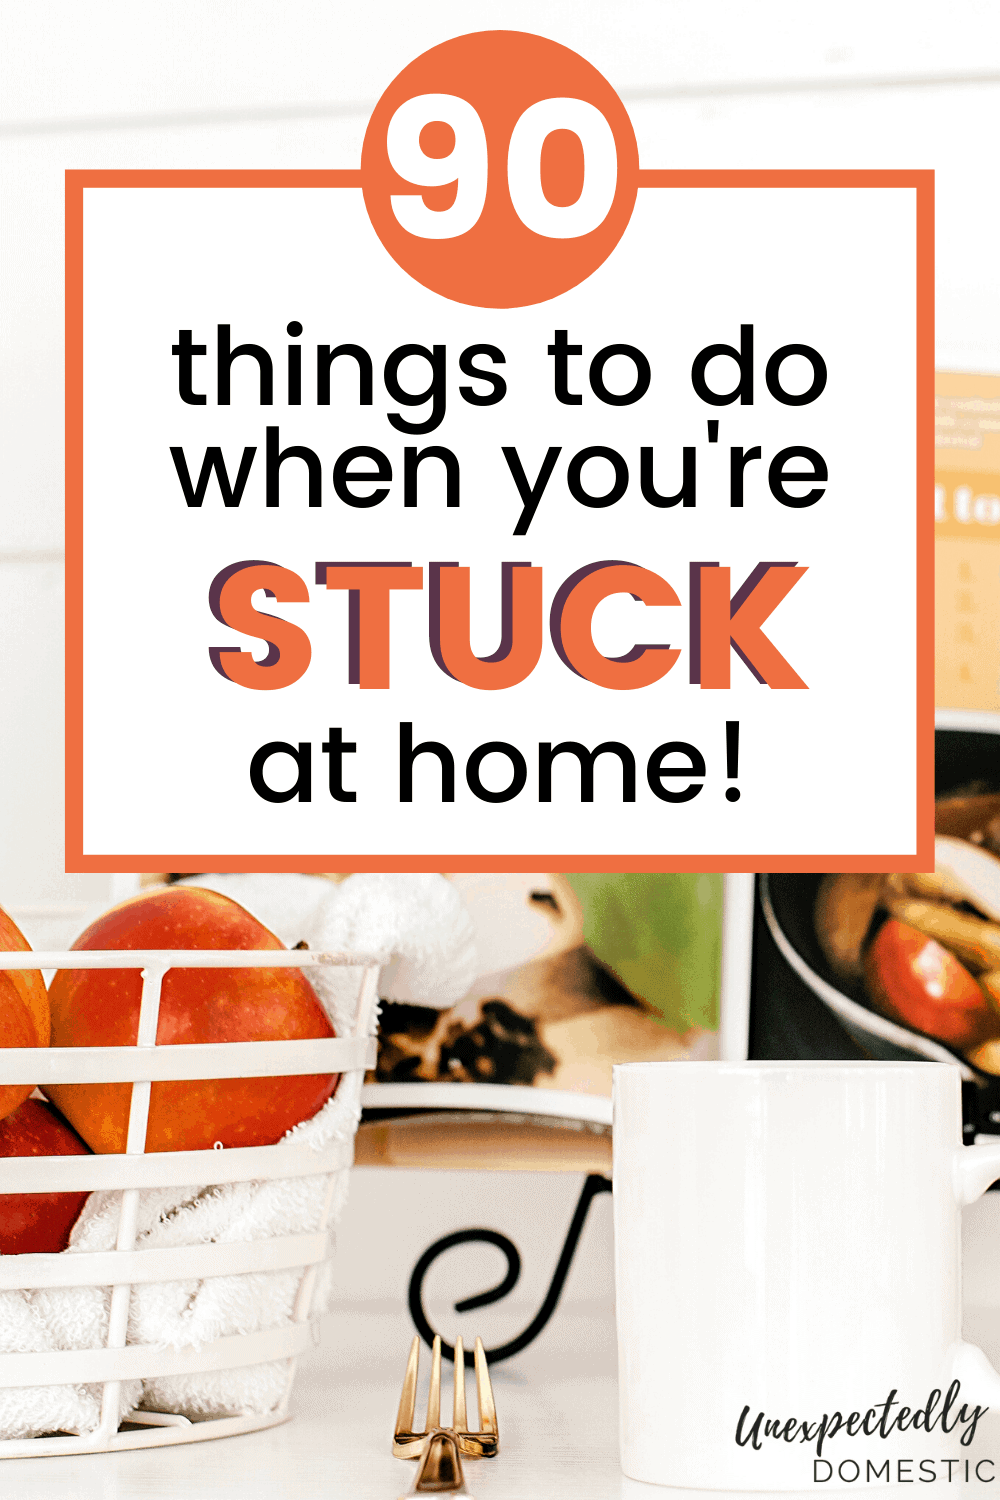 Things to do when you’re bored at home! Here are 90 fun AND productive things to pass the time when you’re stuck at home.